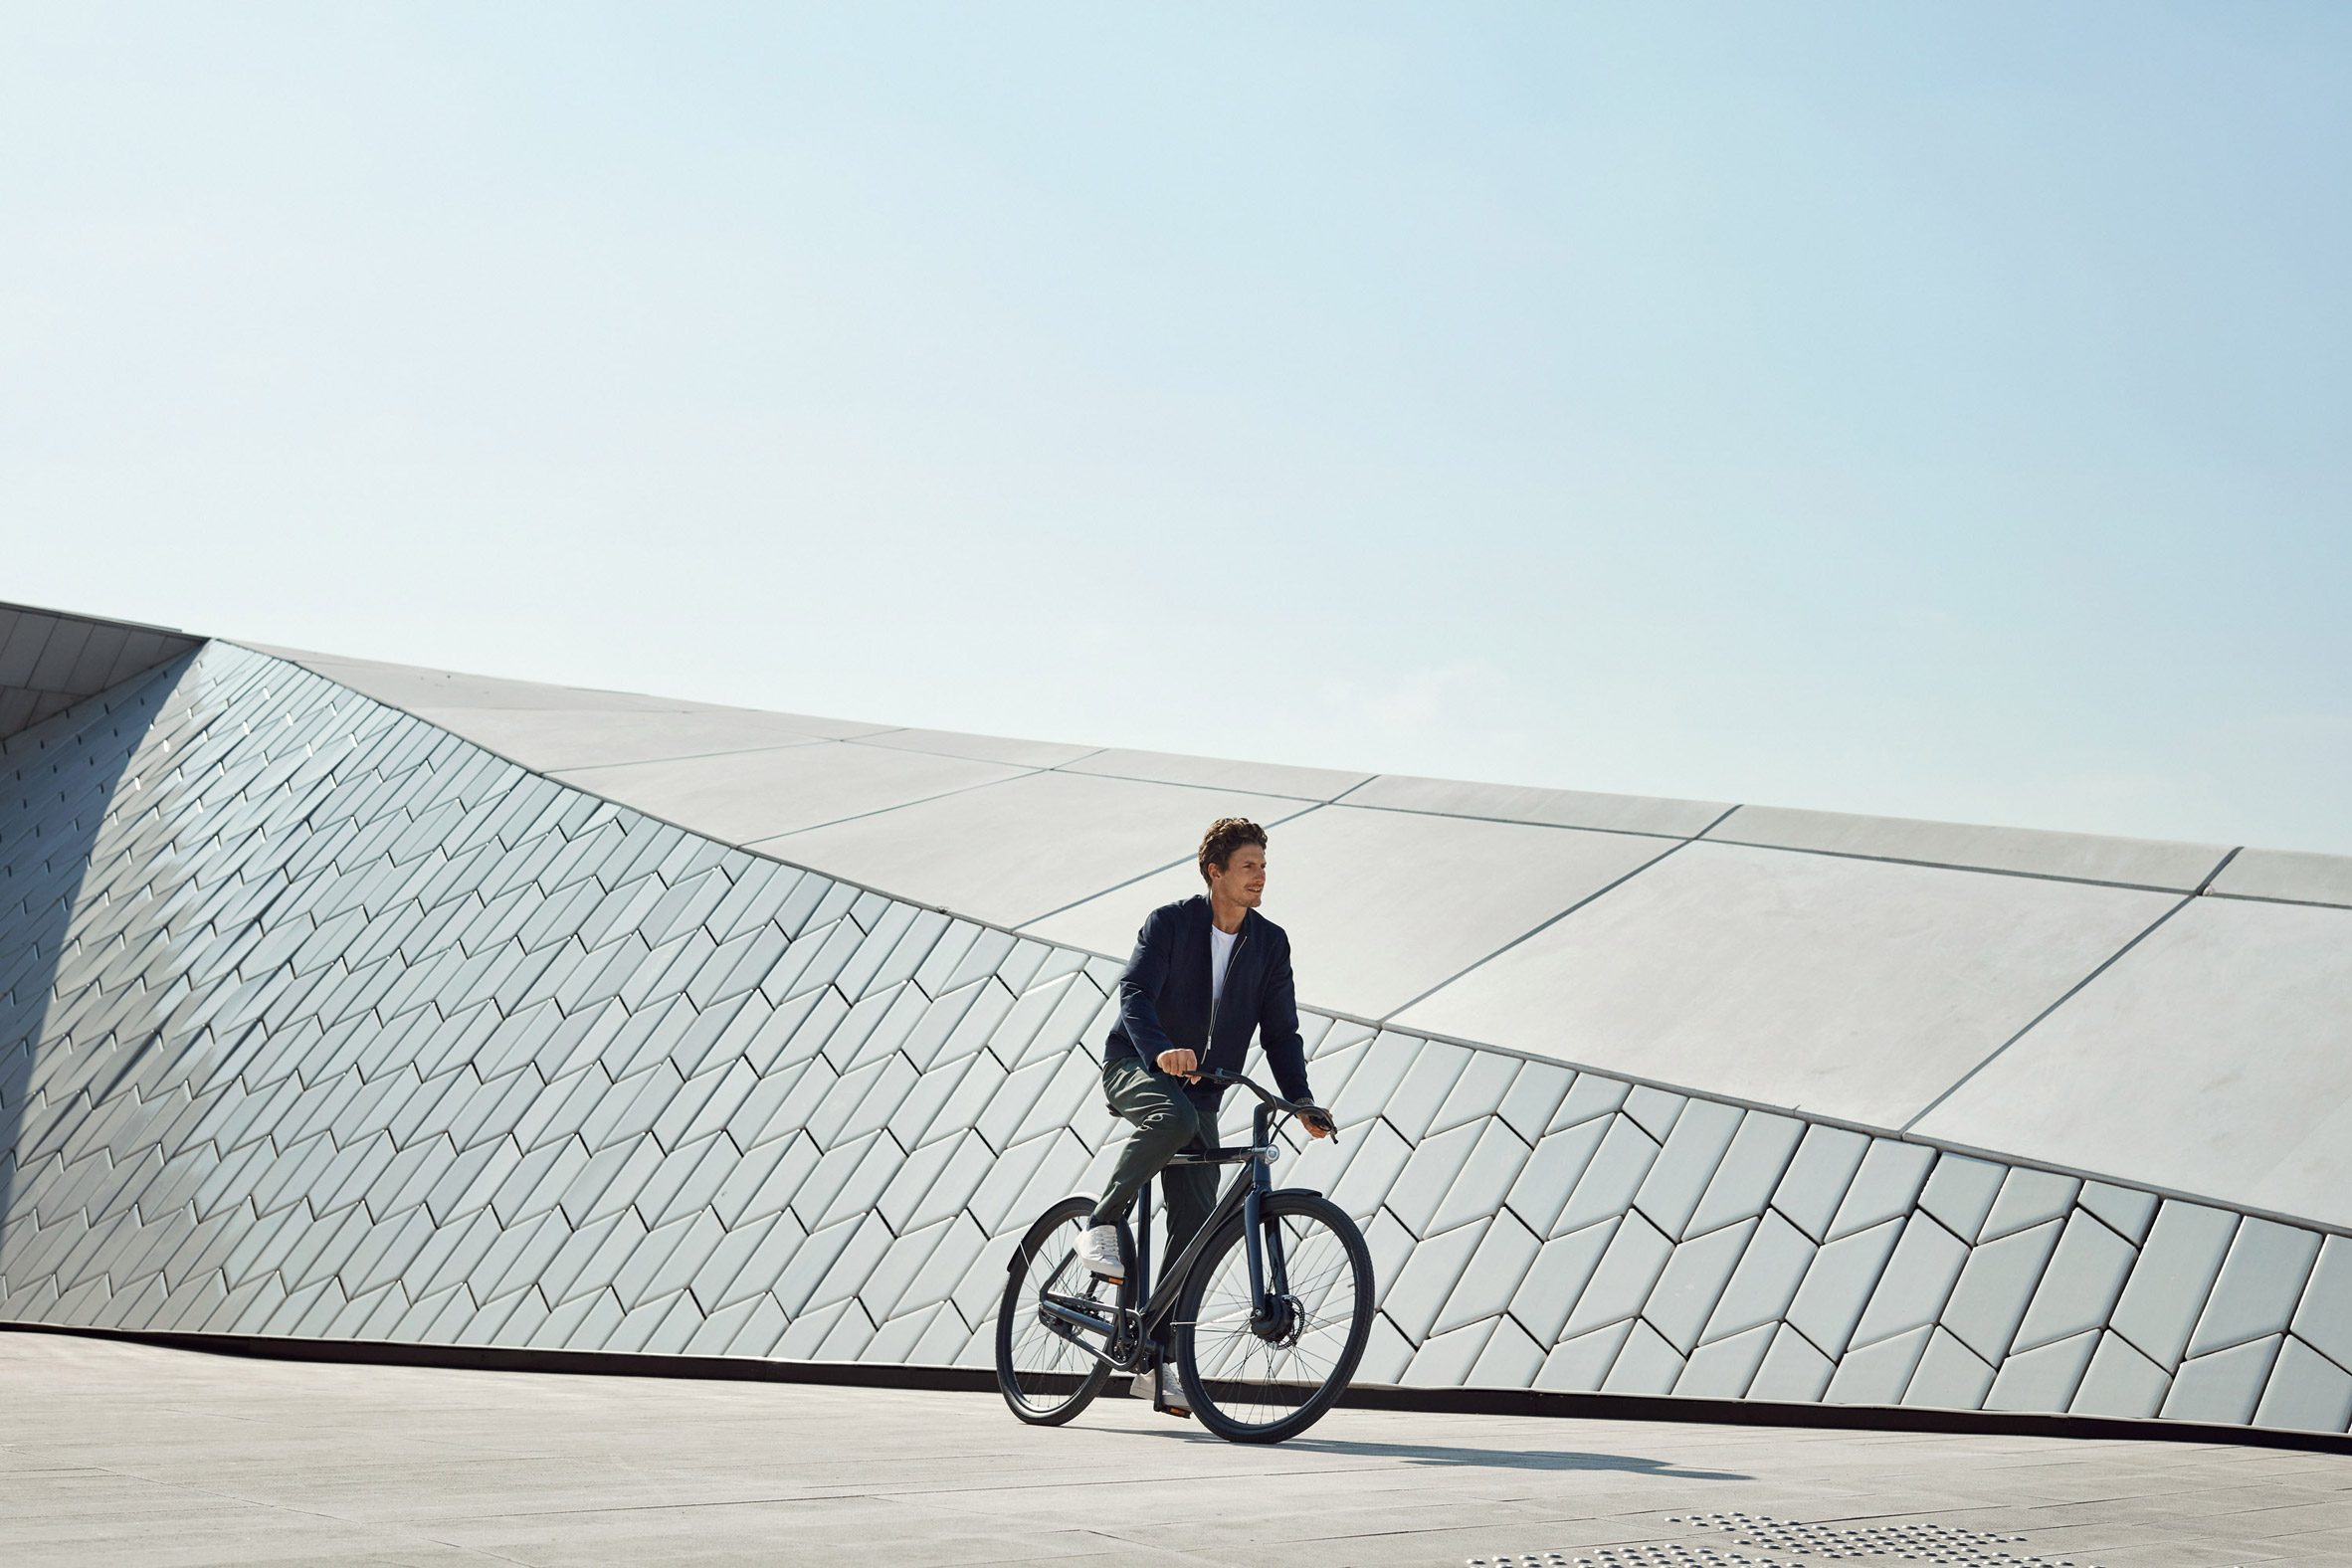 VanMoof launches lock-free Electrified bike that can "take care of itself"